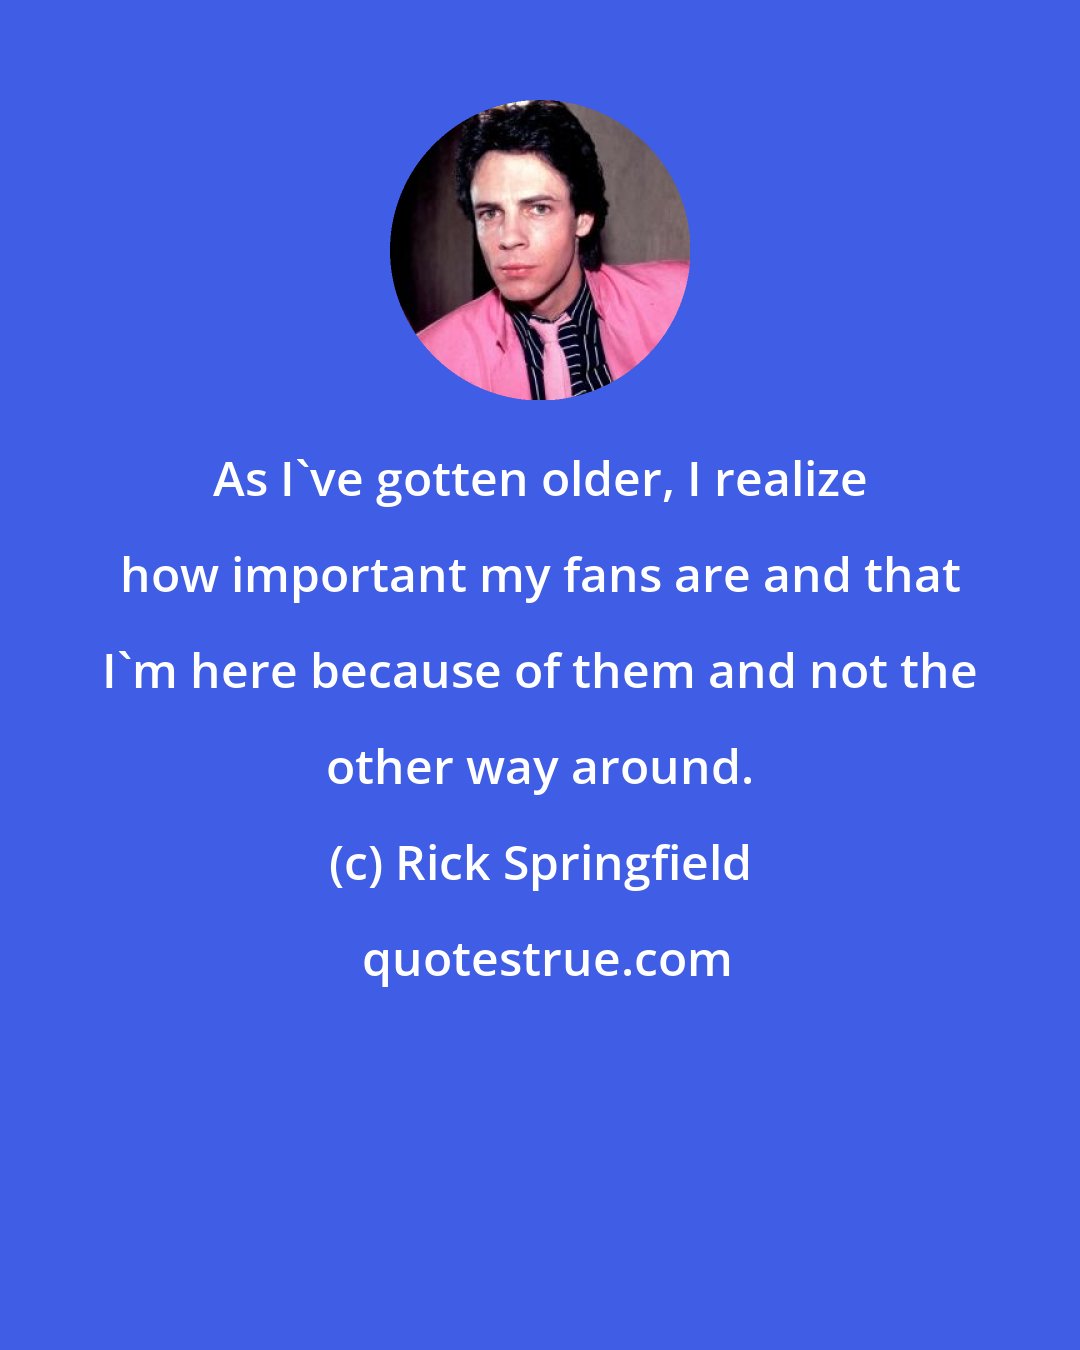 Rick Springfield: As I've gotten older, I realize how important my fans are and that I'm here because of them and not the other way around.